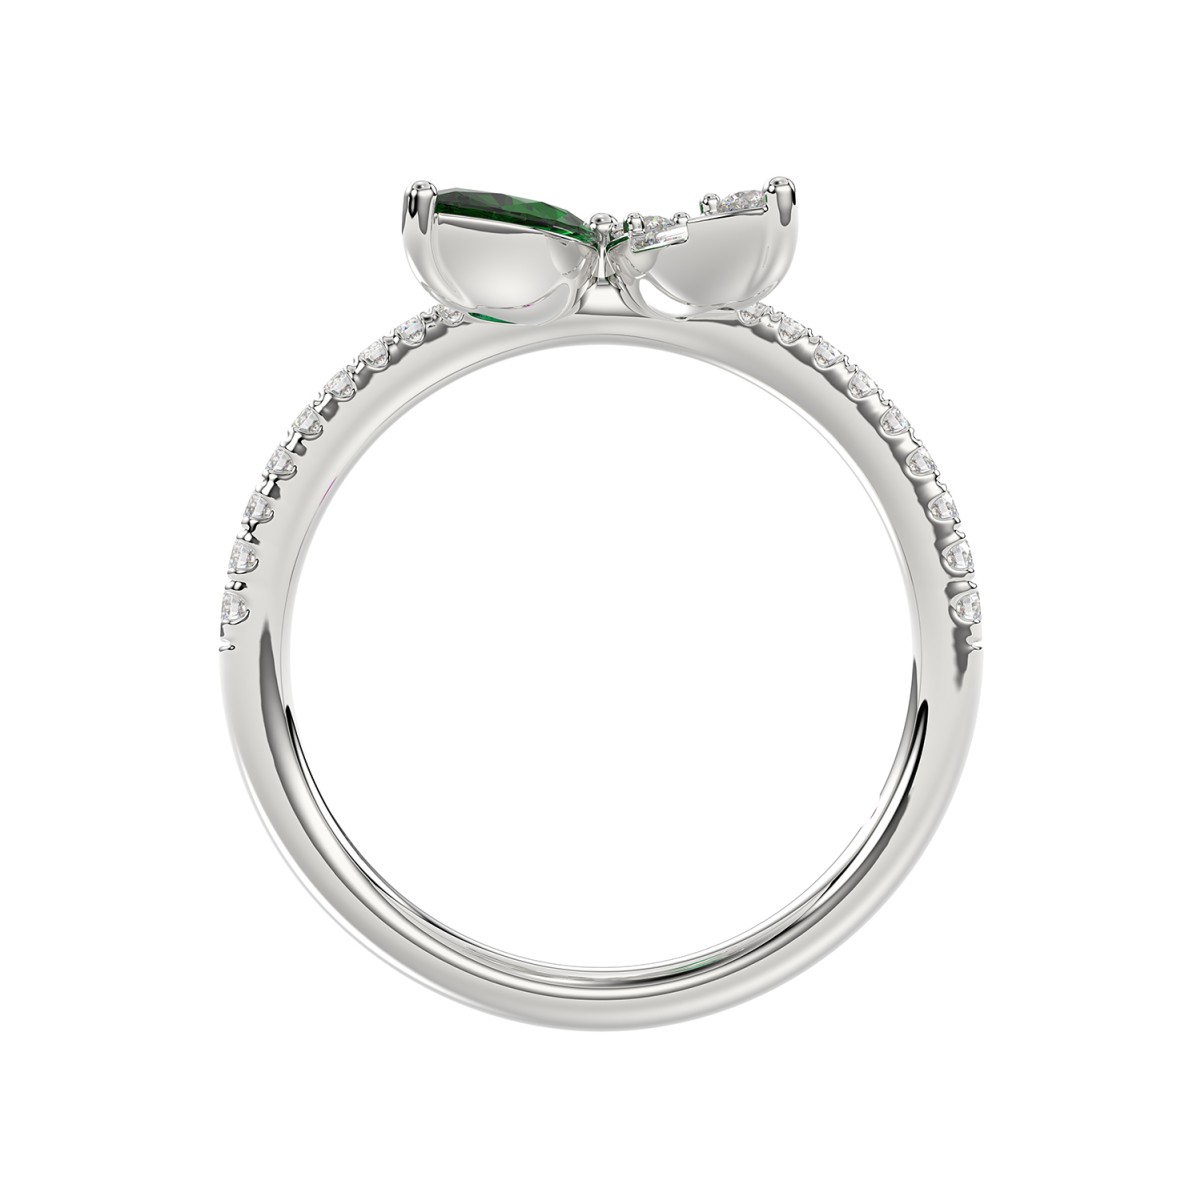 14K WHITE GOLD 1 7/8CT ROUND/BAGUETTE/MARQUISE DIAMOND LADIES FASHION RING(COLOR STONE MARQUISE GREEN EMERALD DIAMOND 1 5/8 CT)